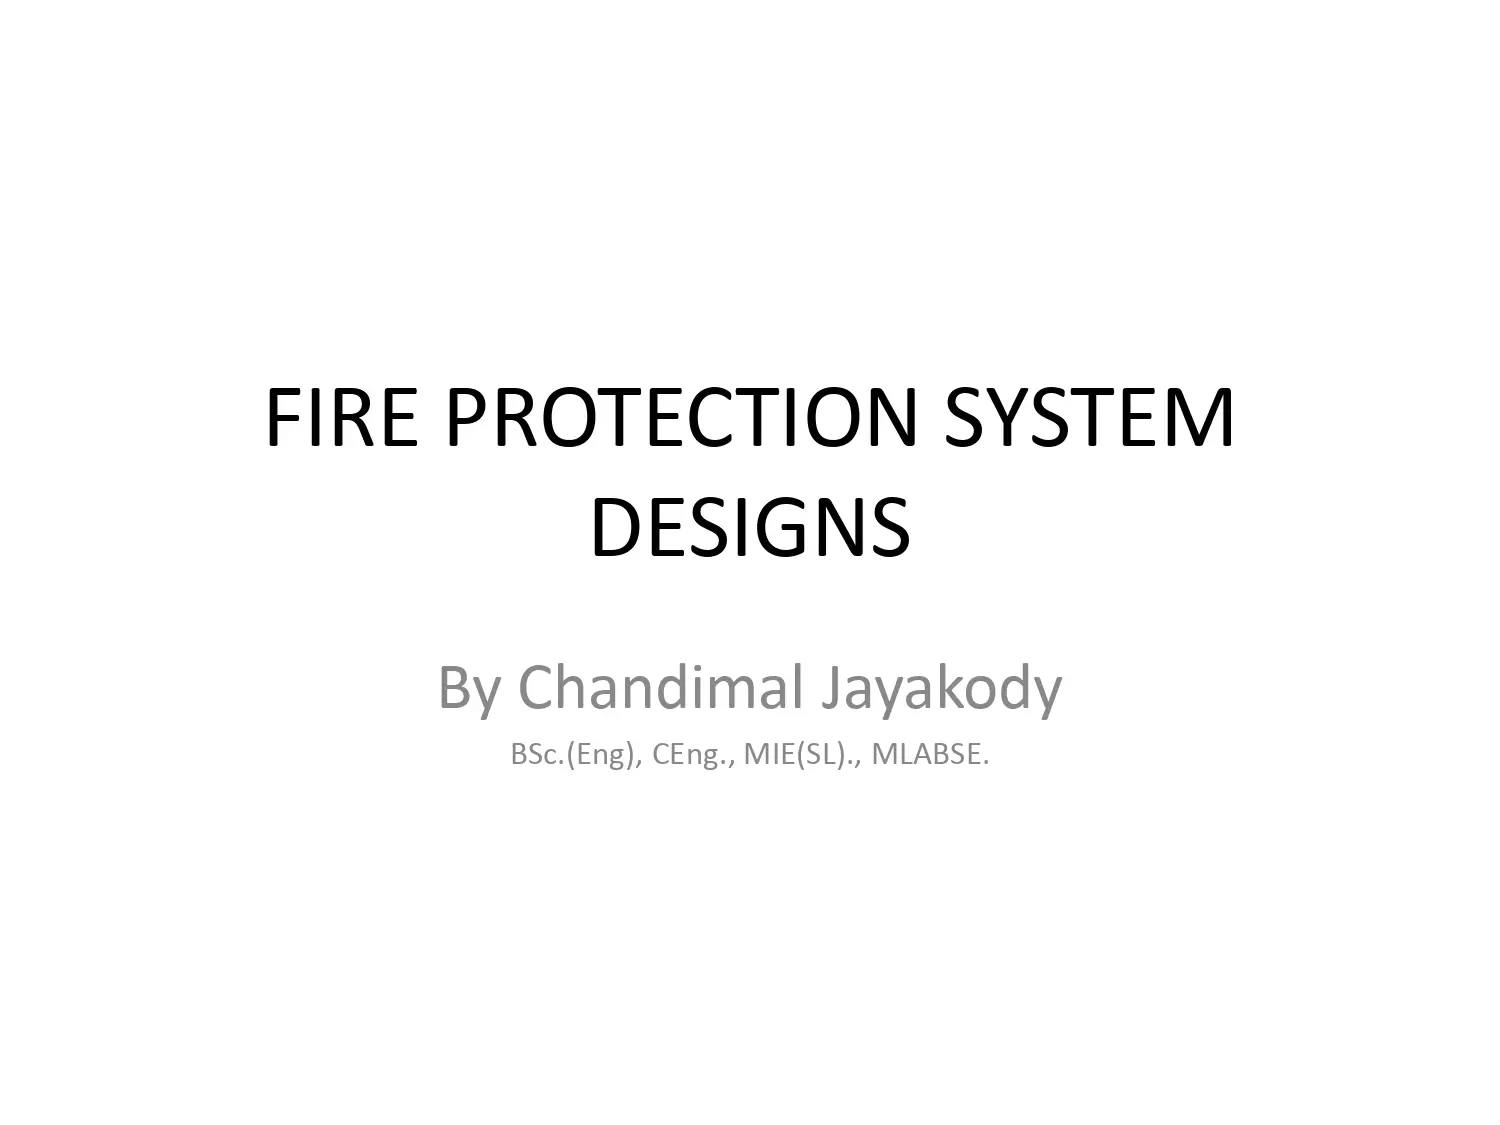 Fire Protection System Designs